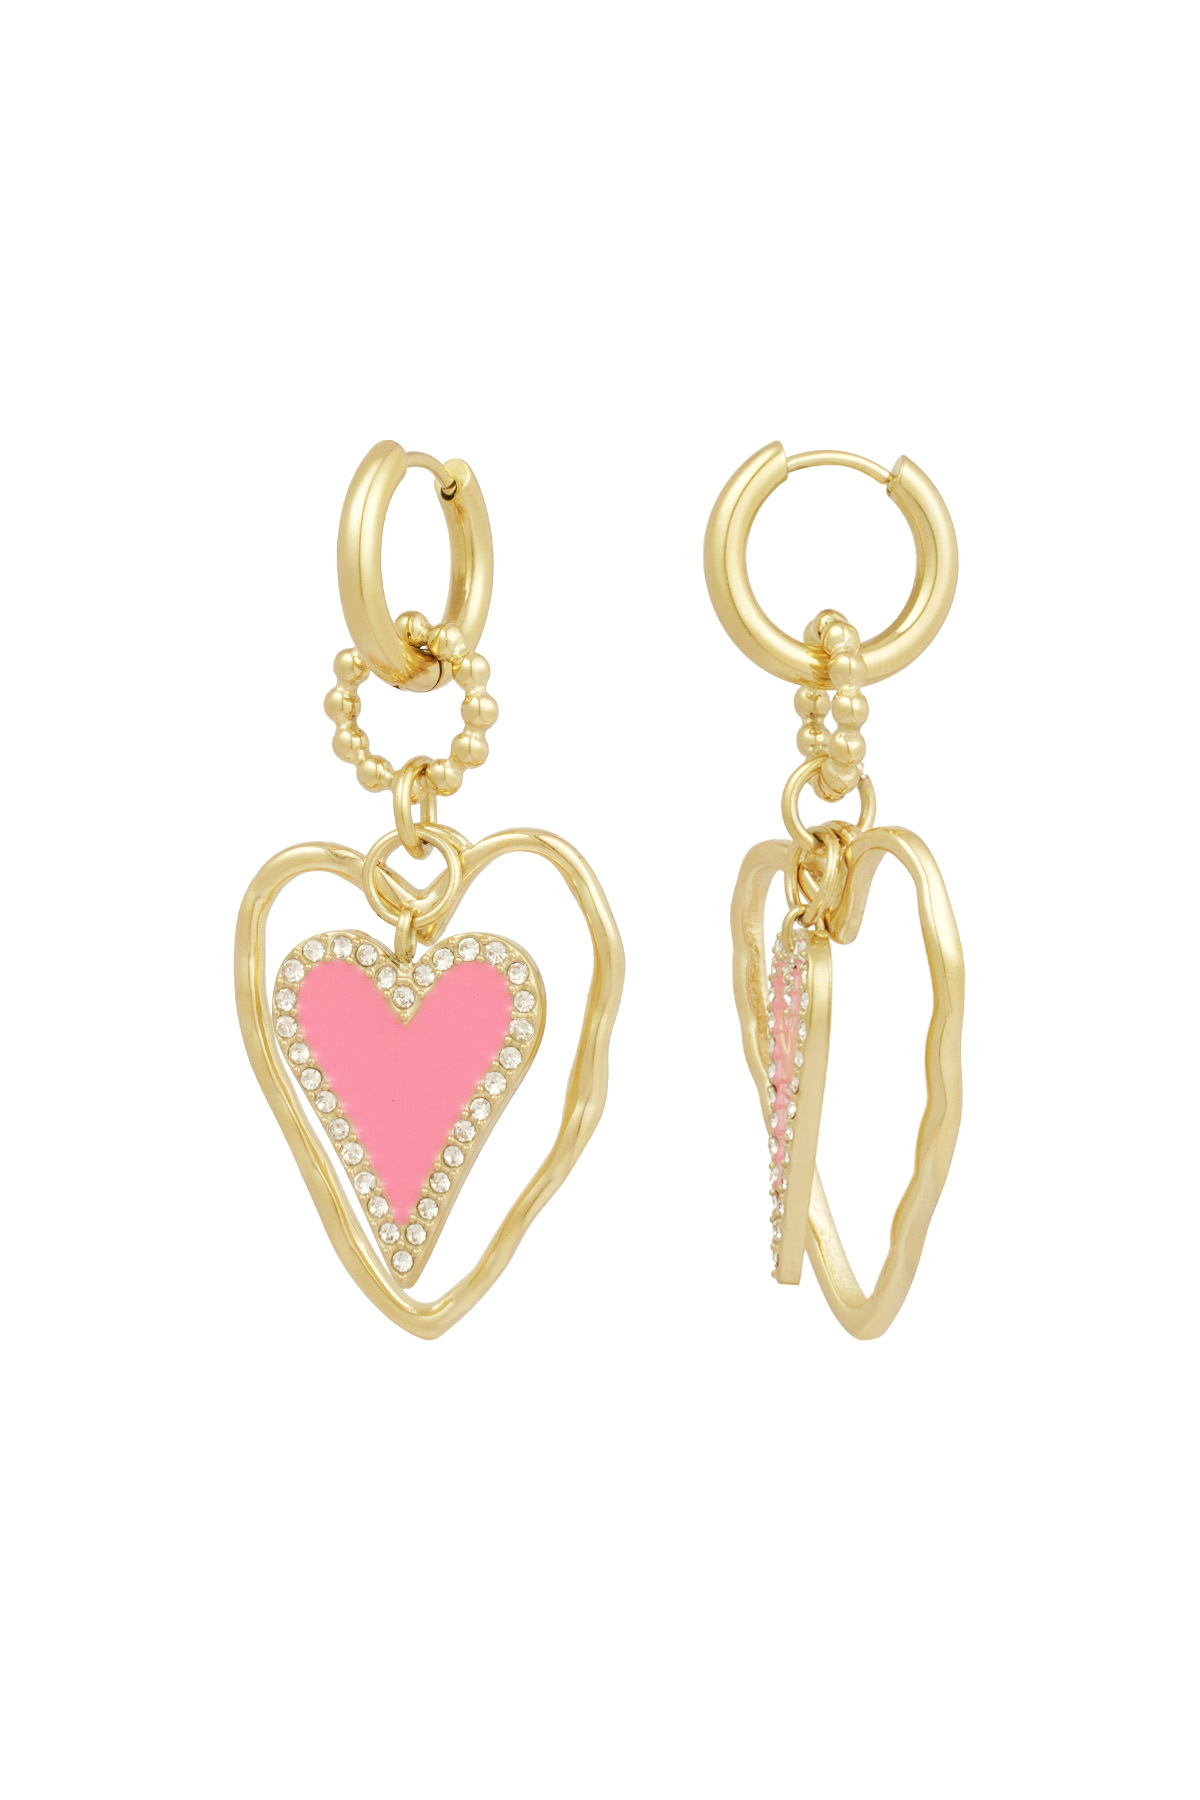 Boucles d'oreilles lovers madhouse - or rose 